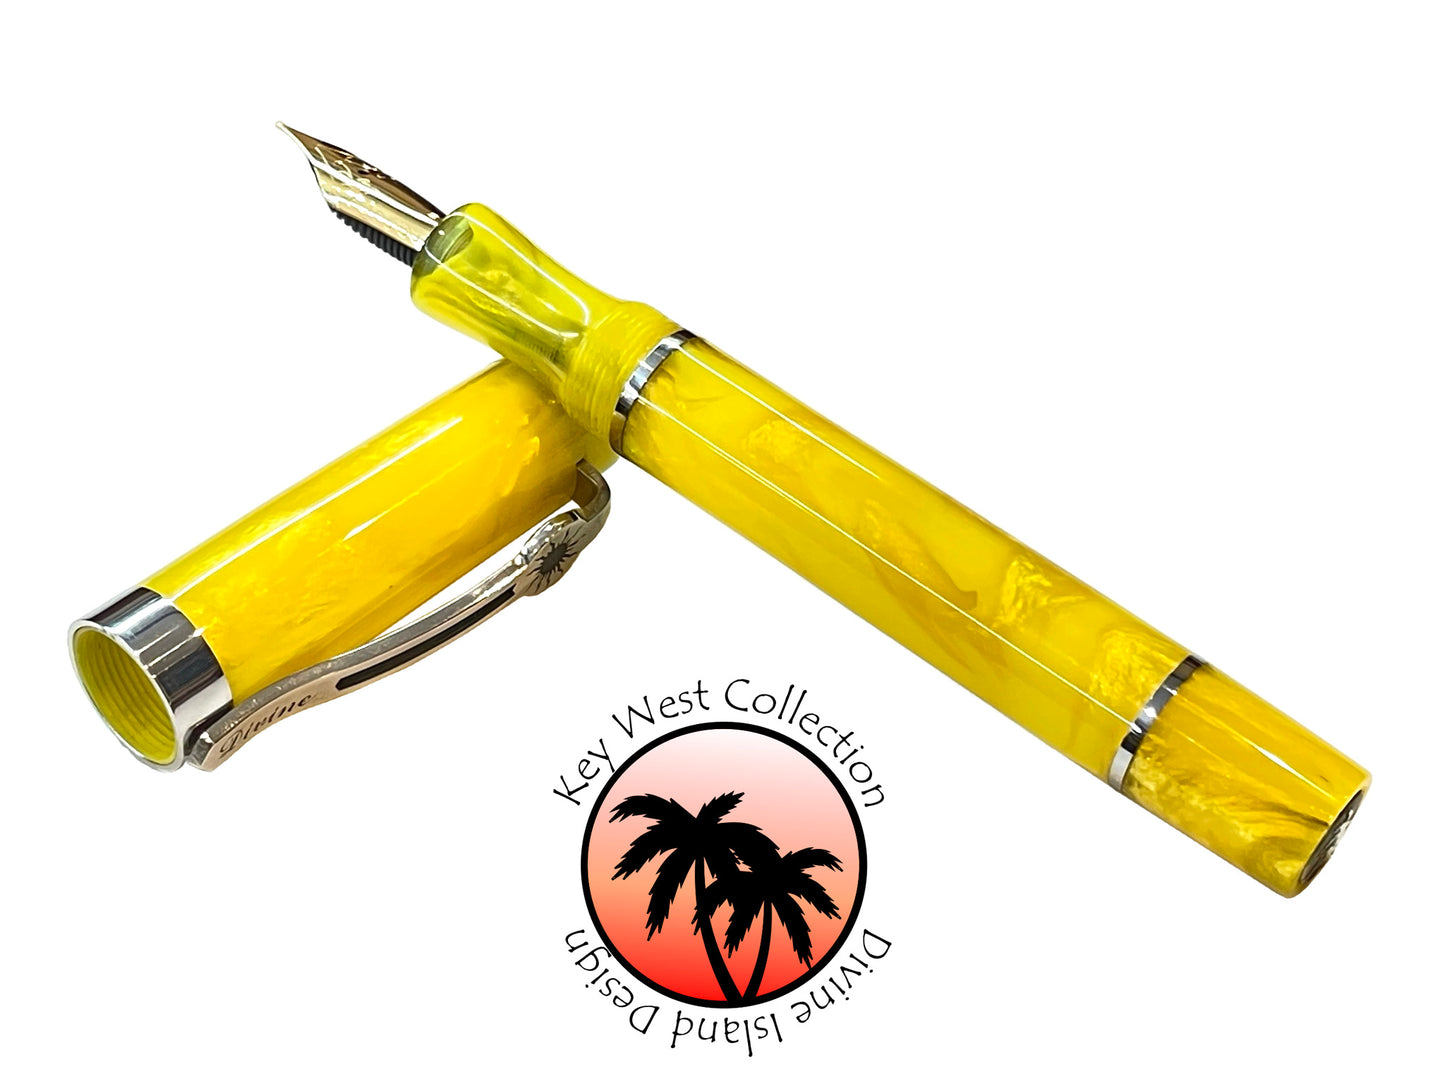 Key West Collection Fountain Pen - "Pineapple"